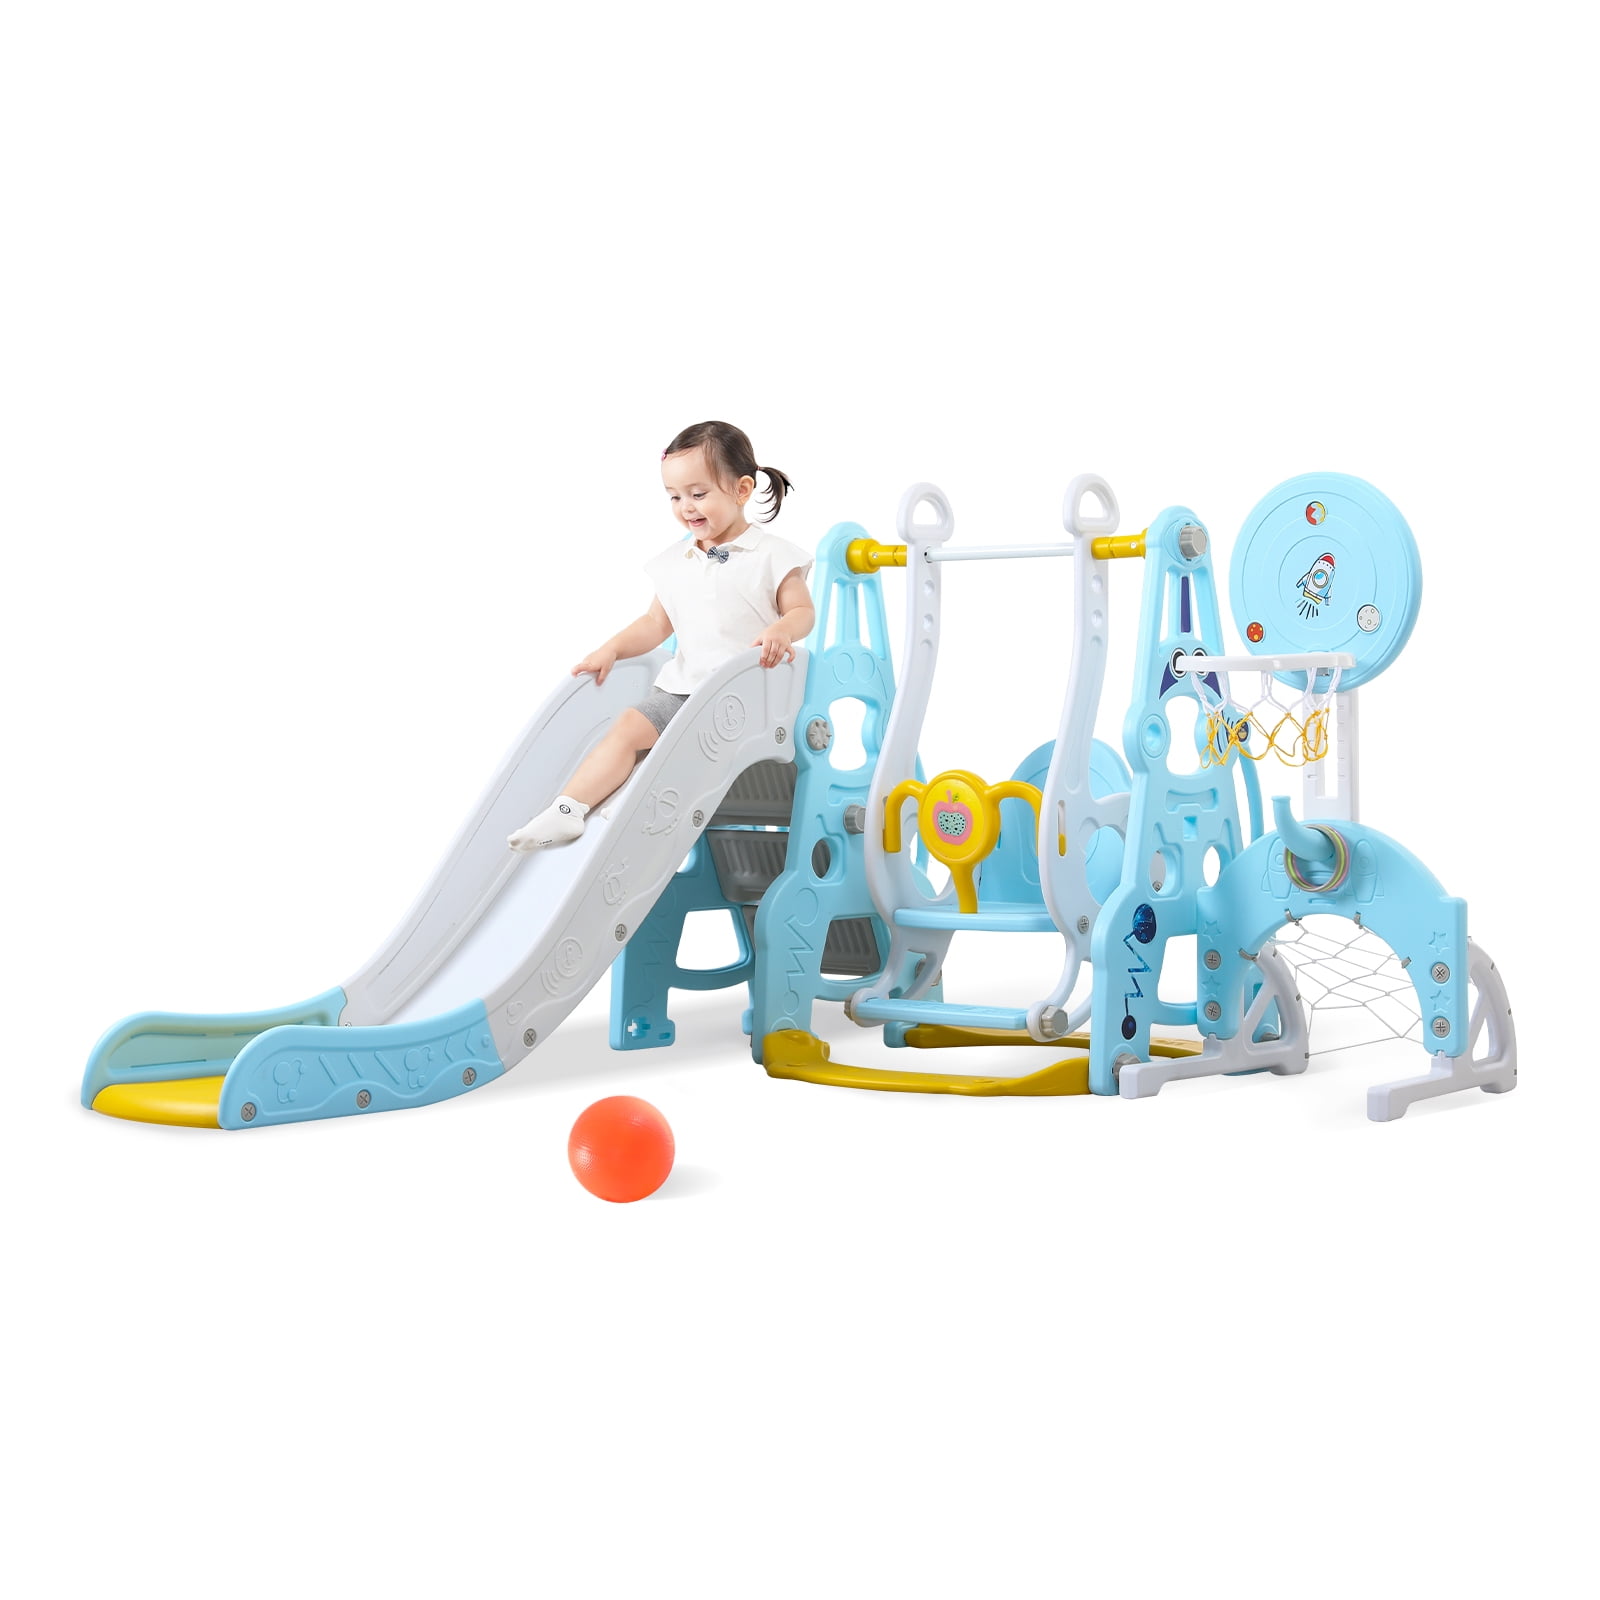 Dongfans Toddler Climber and Swing Set Freestanding 4 in 1 Toddler Climber and Swing Set Extra Long Slide and Ball Kids Play Climber Slide Playset with Basketball Hoop